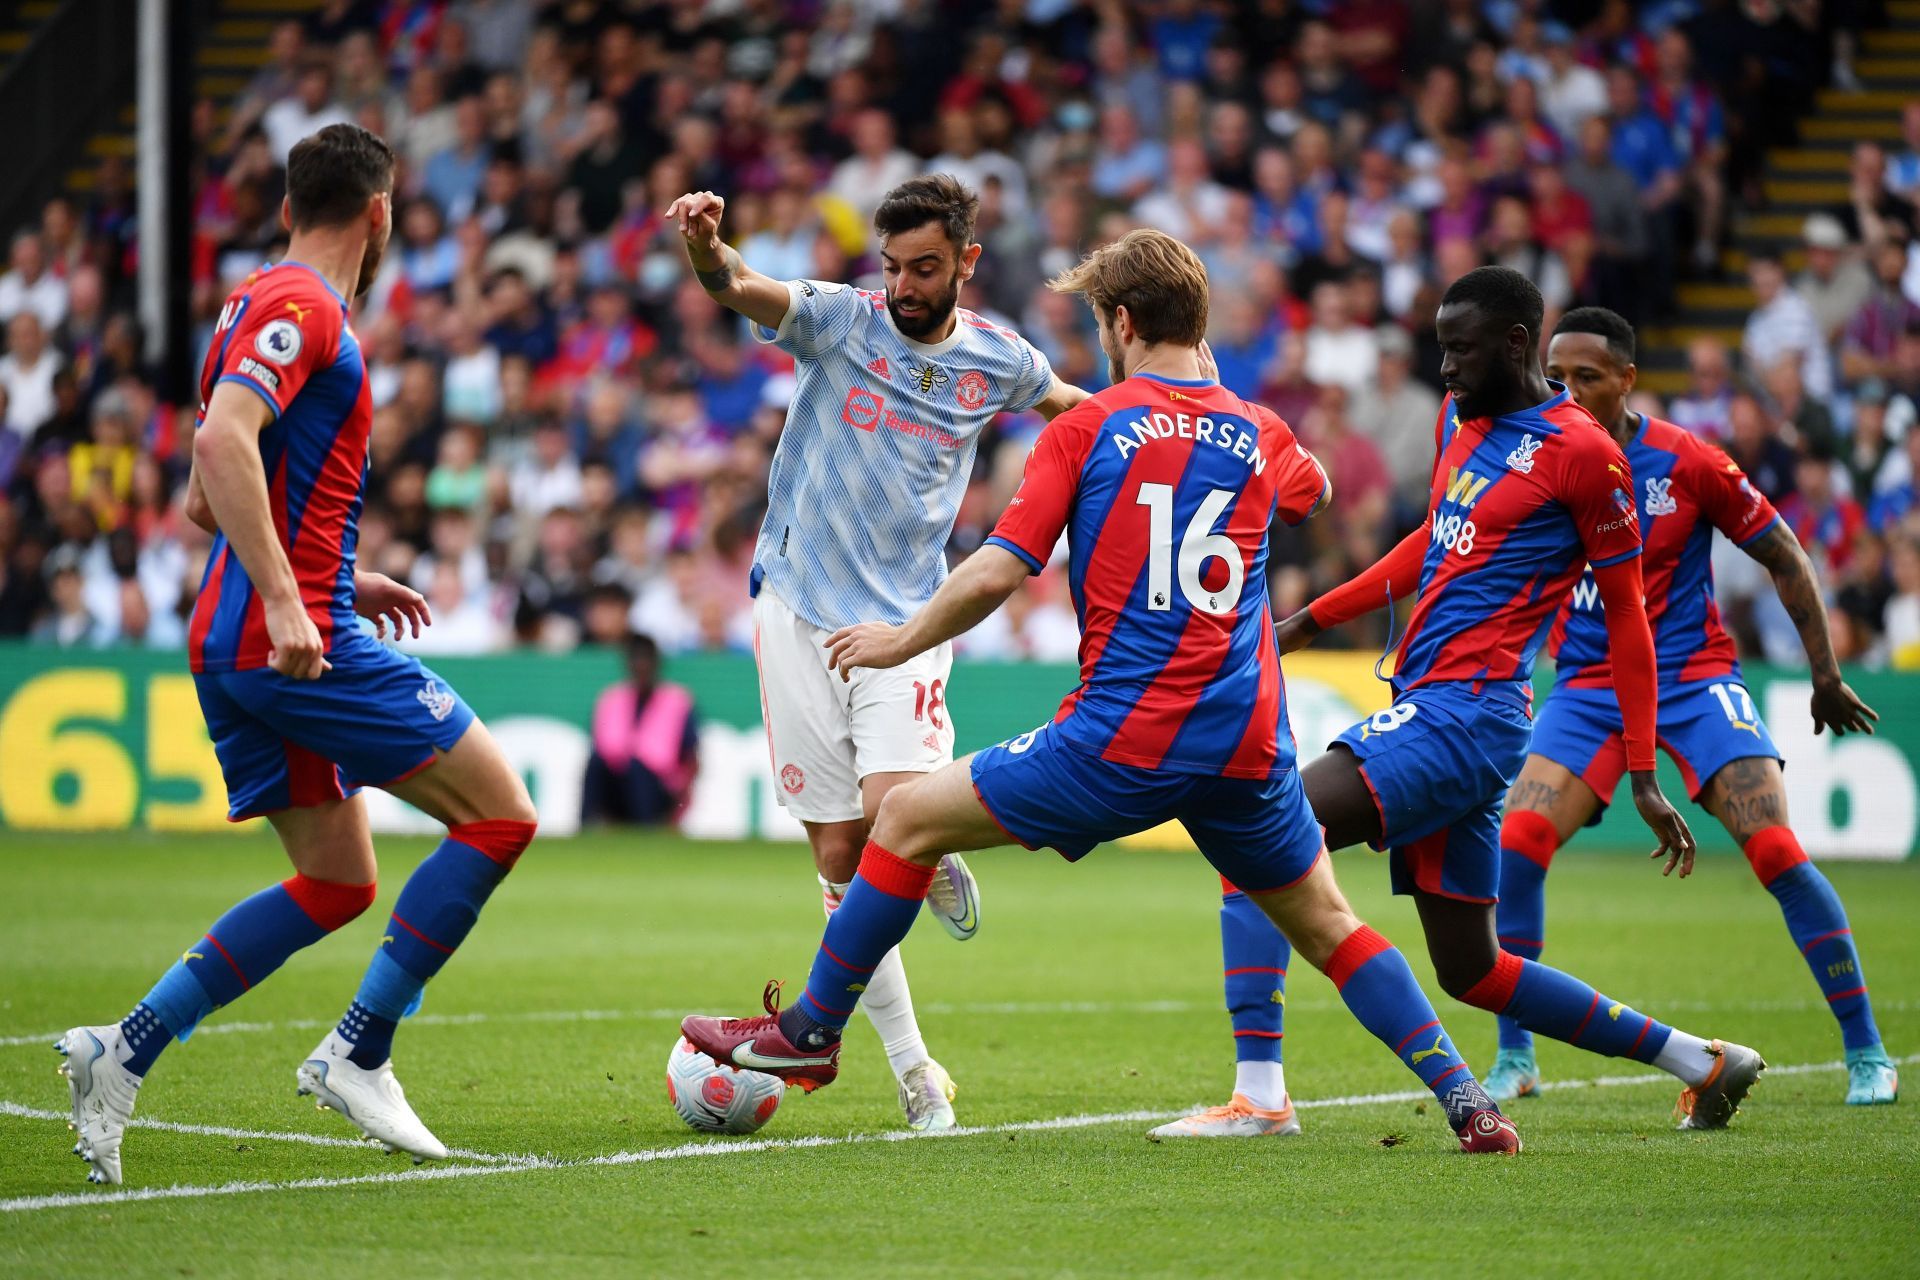 Manchester United&#039;s Fernandes had a game to forget as nothing that he tried seemed to come off